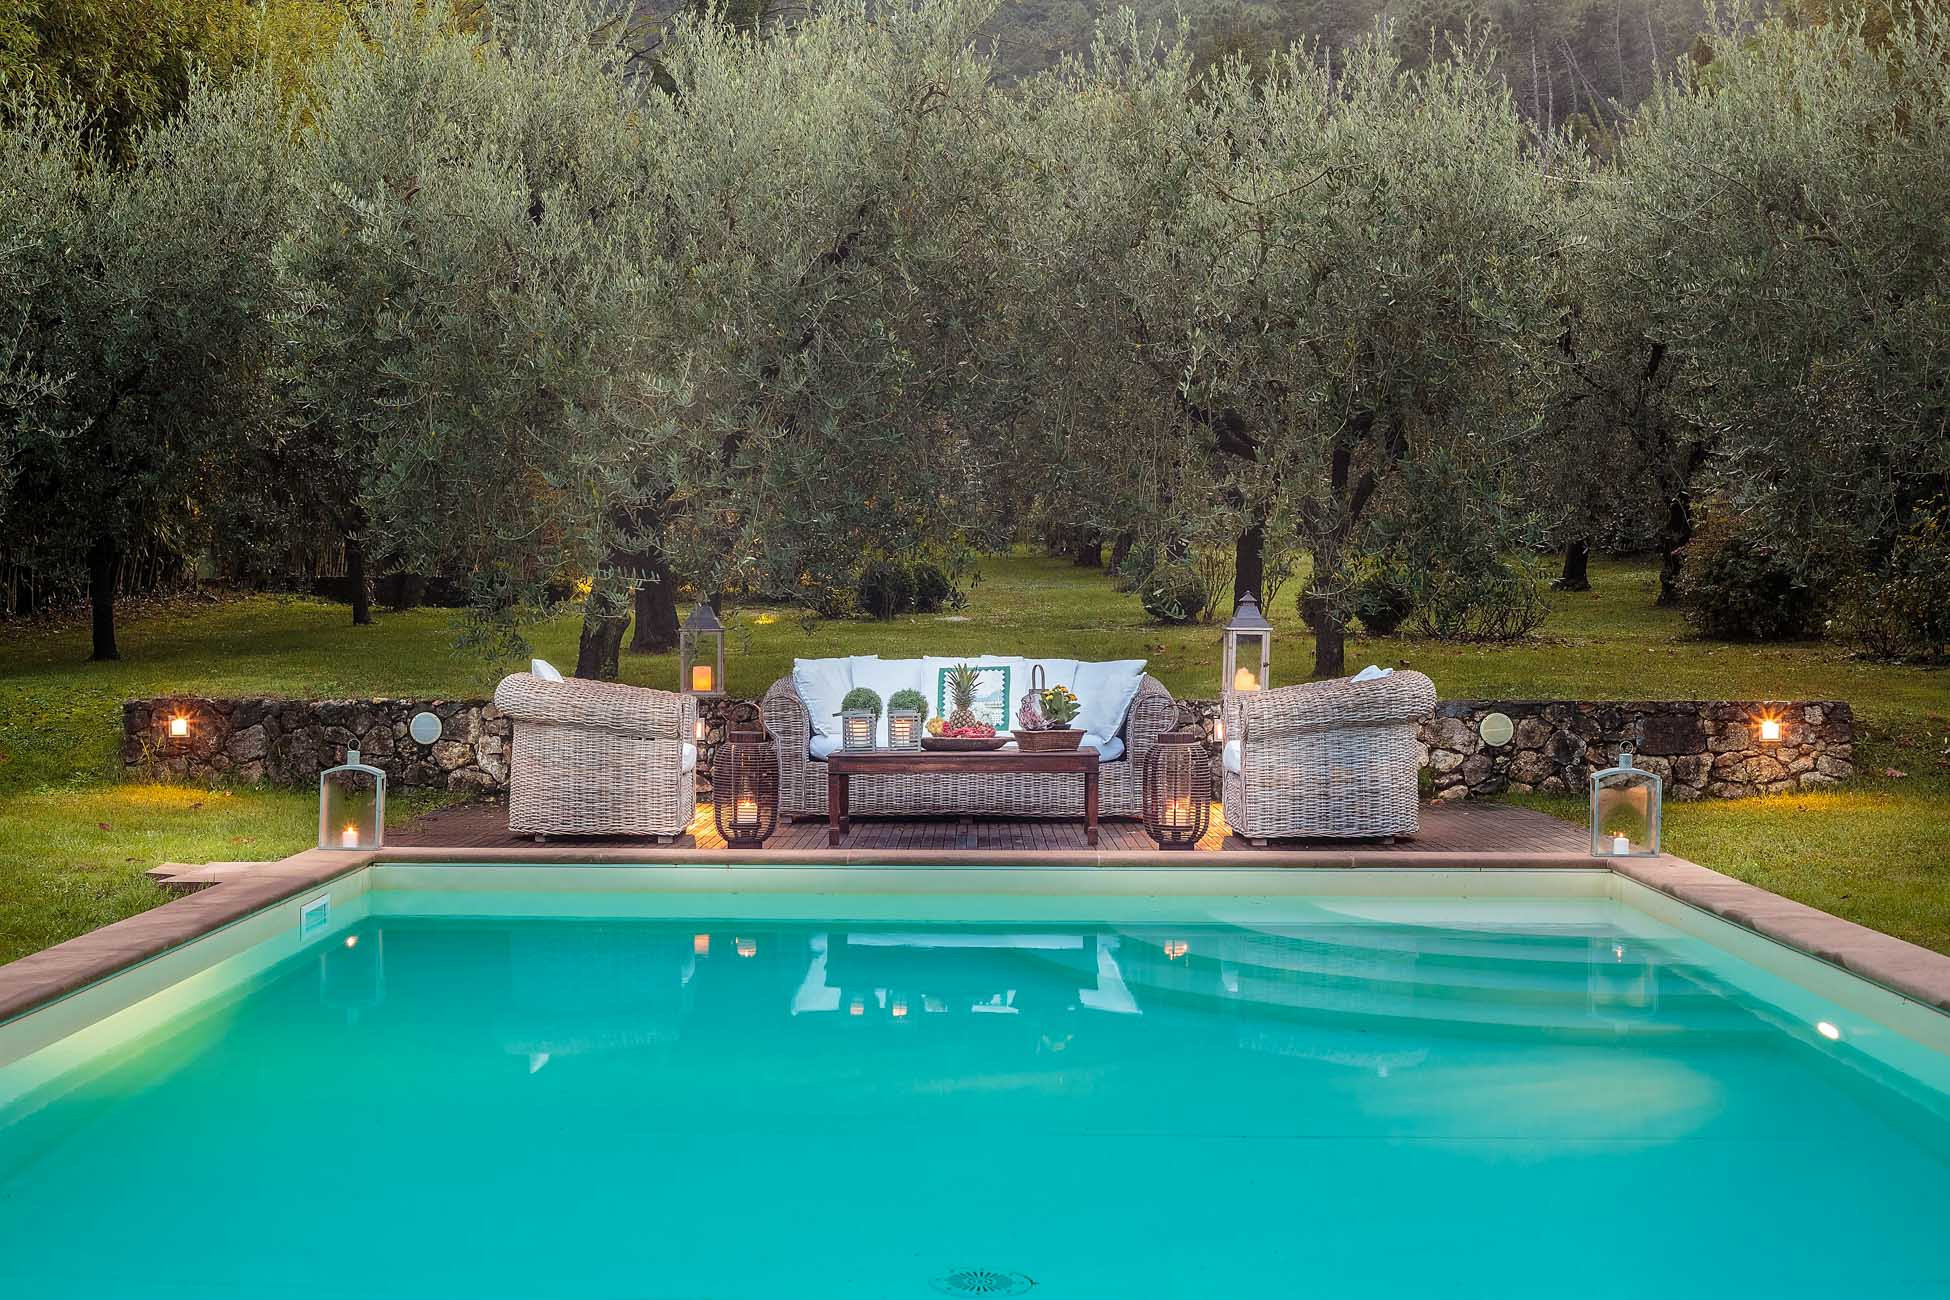 Villa/Dettached house in Camaiore - Luxury Farmhouse with Private Pool in Camaiore close to Lucca